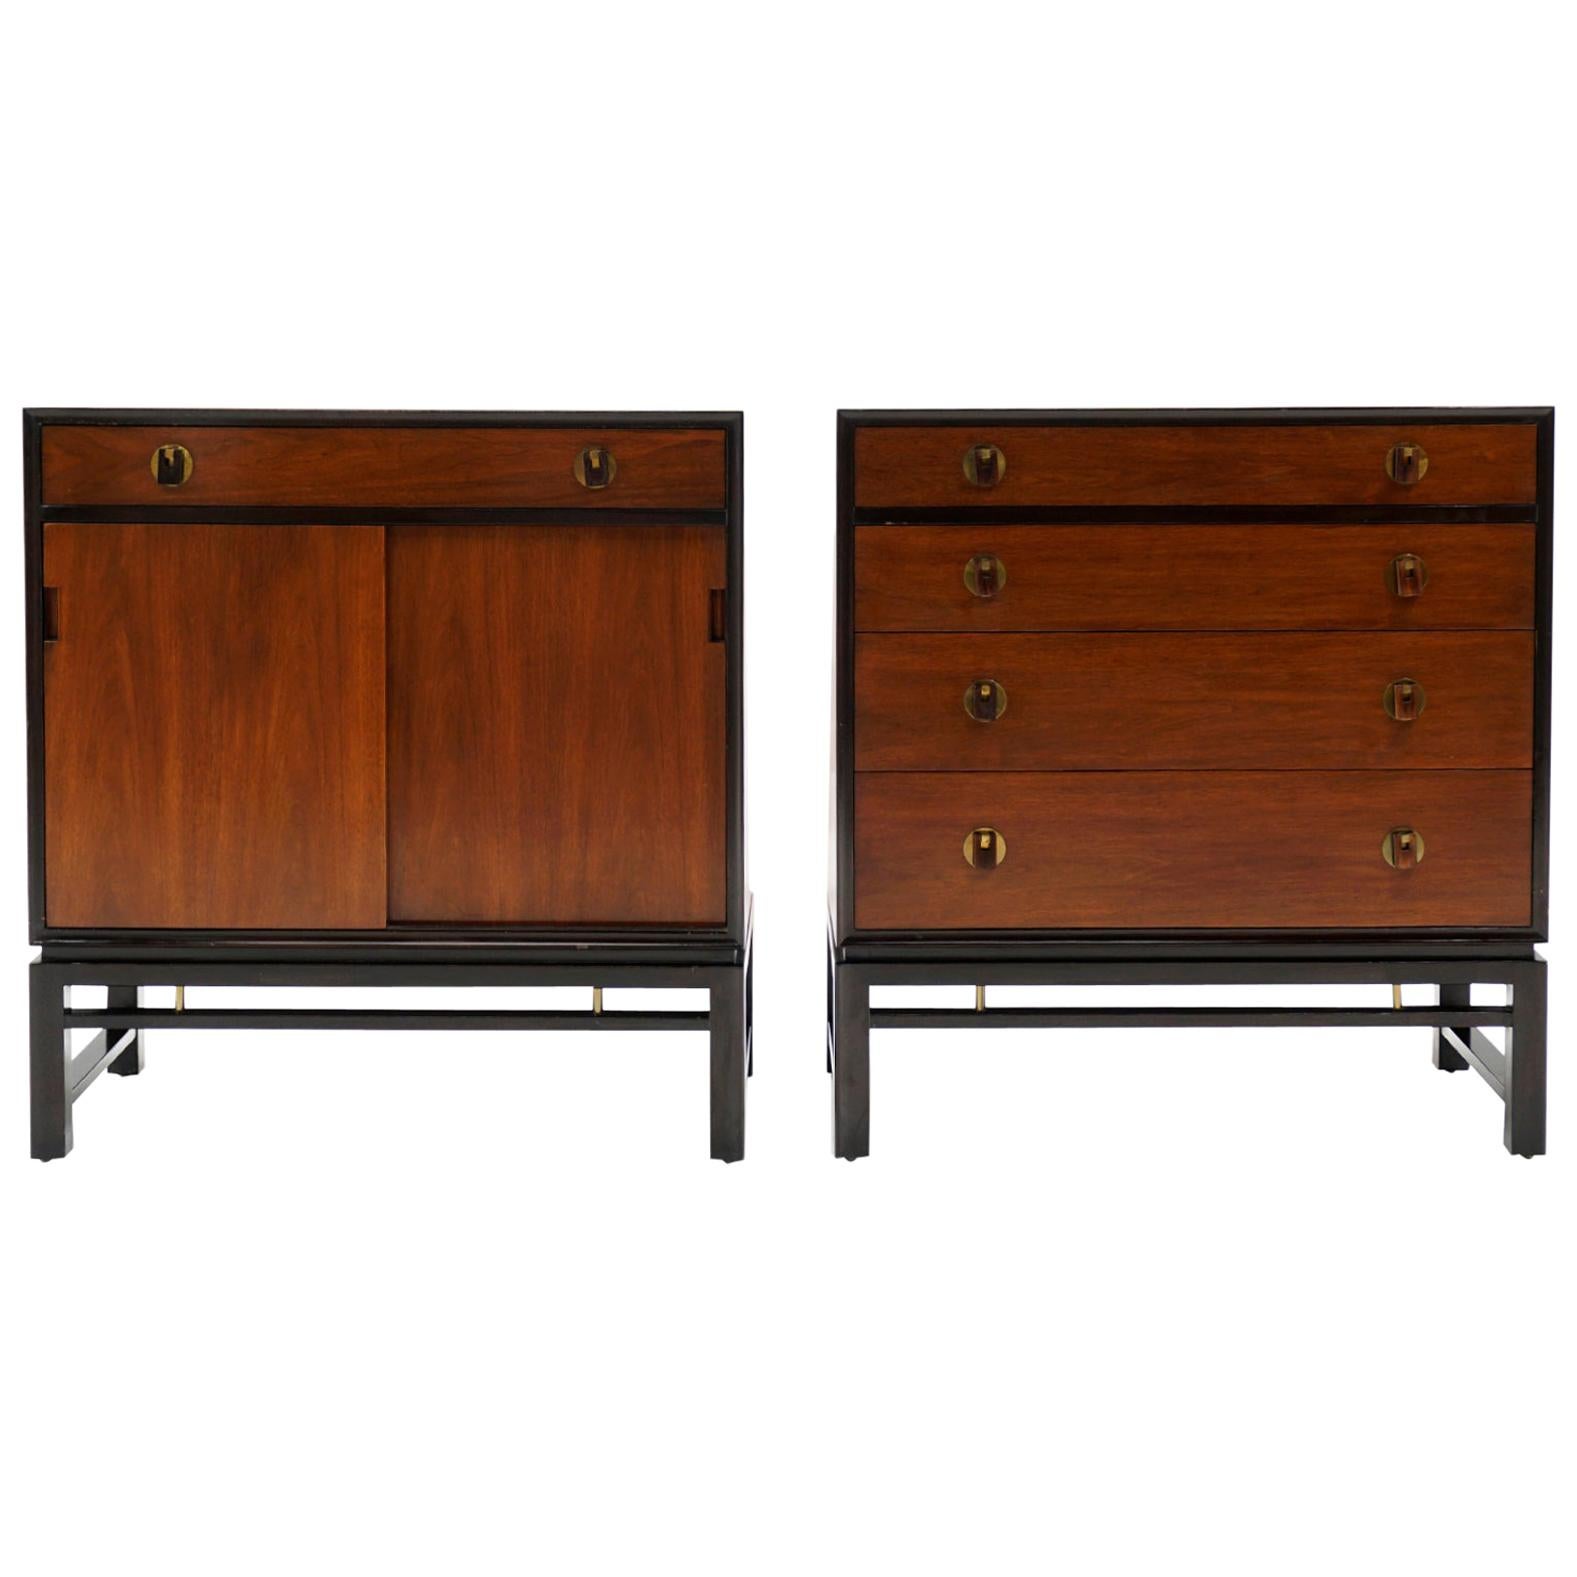 Pair Storage Cabinets by Edward Wormley for Dunbar.  Mahogany and Rosewood.  